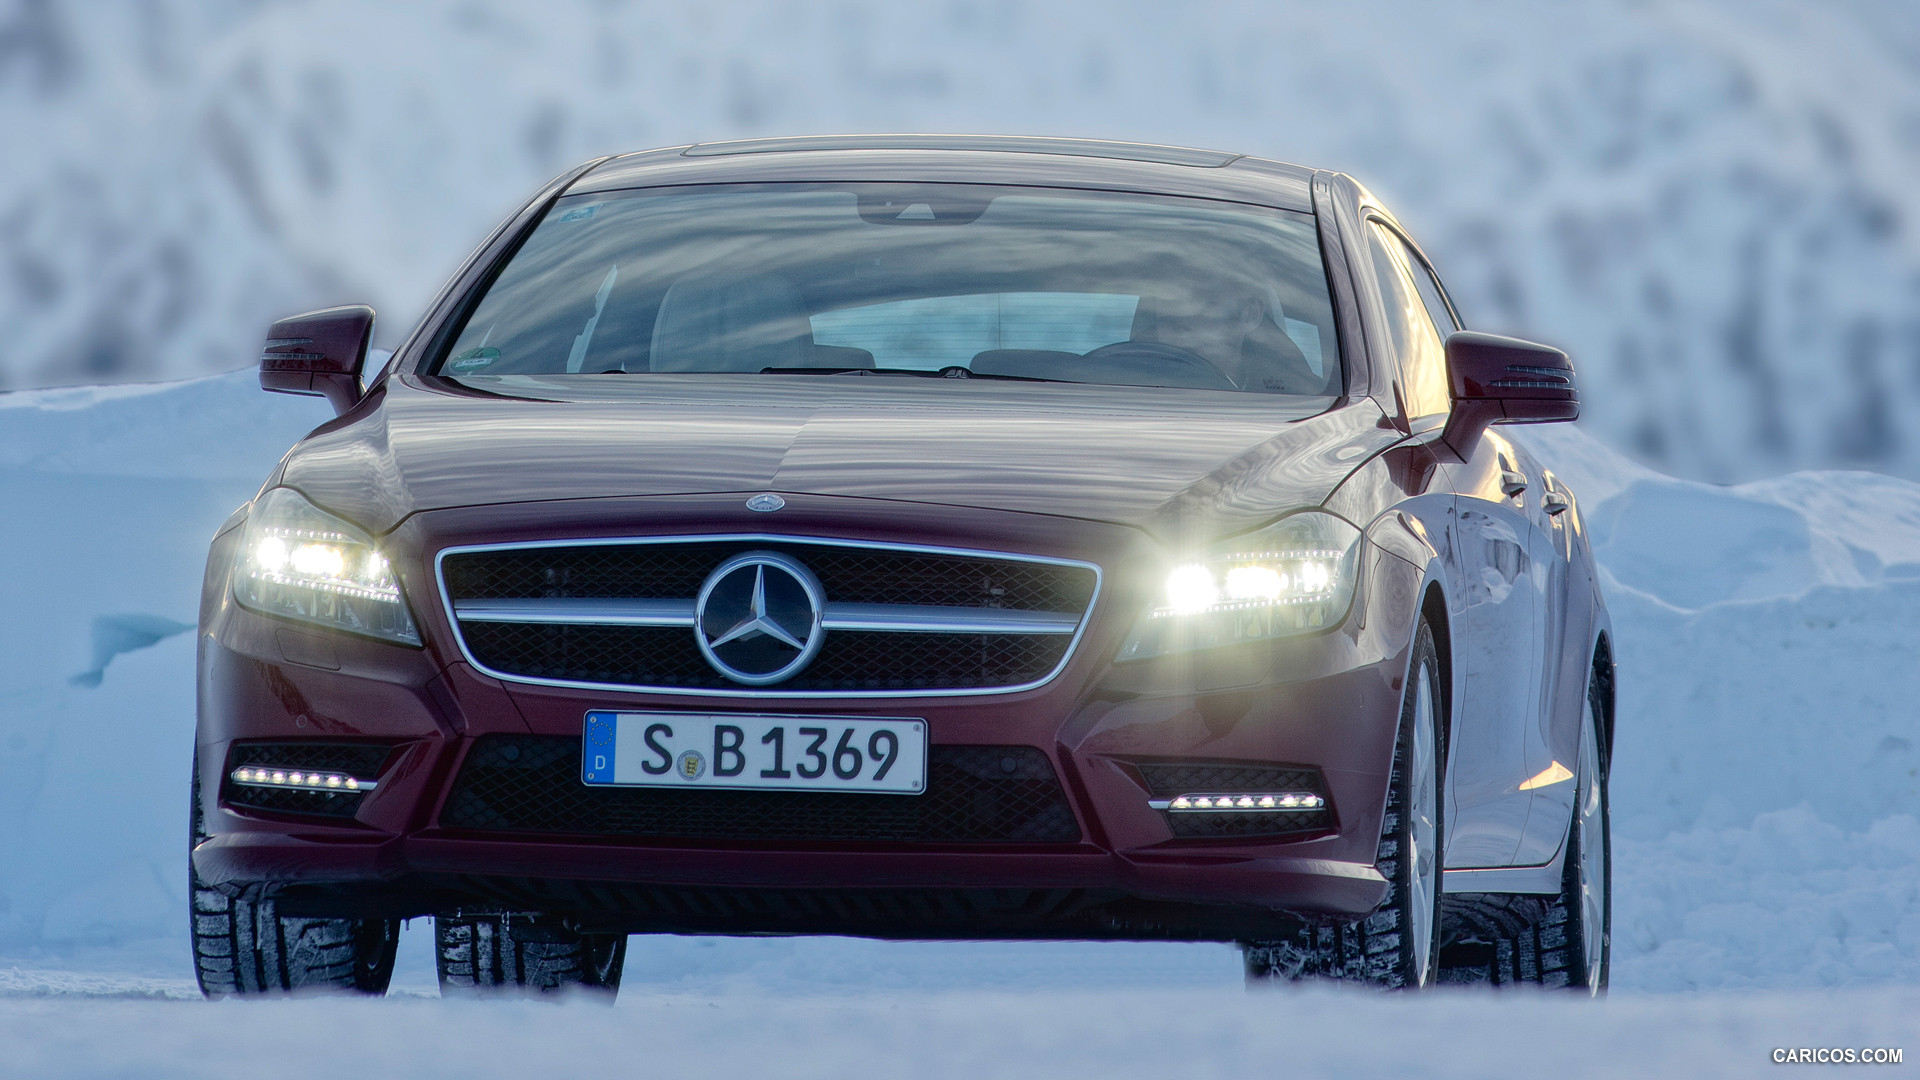 2013 Mercedes-Benz CLS 500 4MATIC Shooting Brake on Snow - Front, #161 of 184